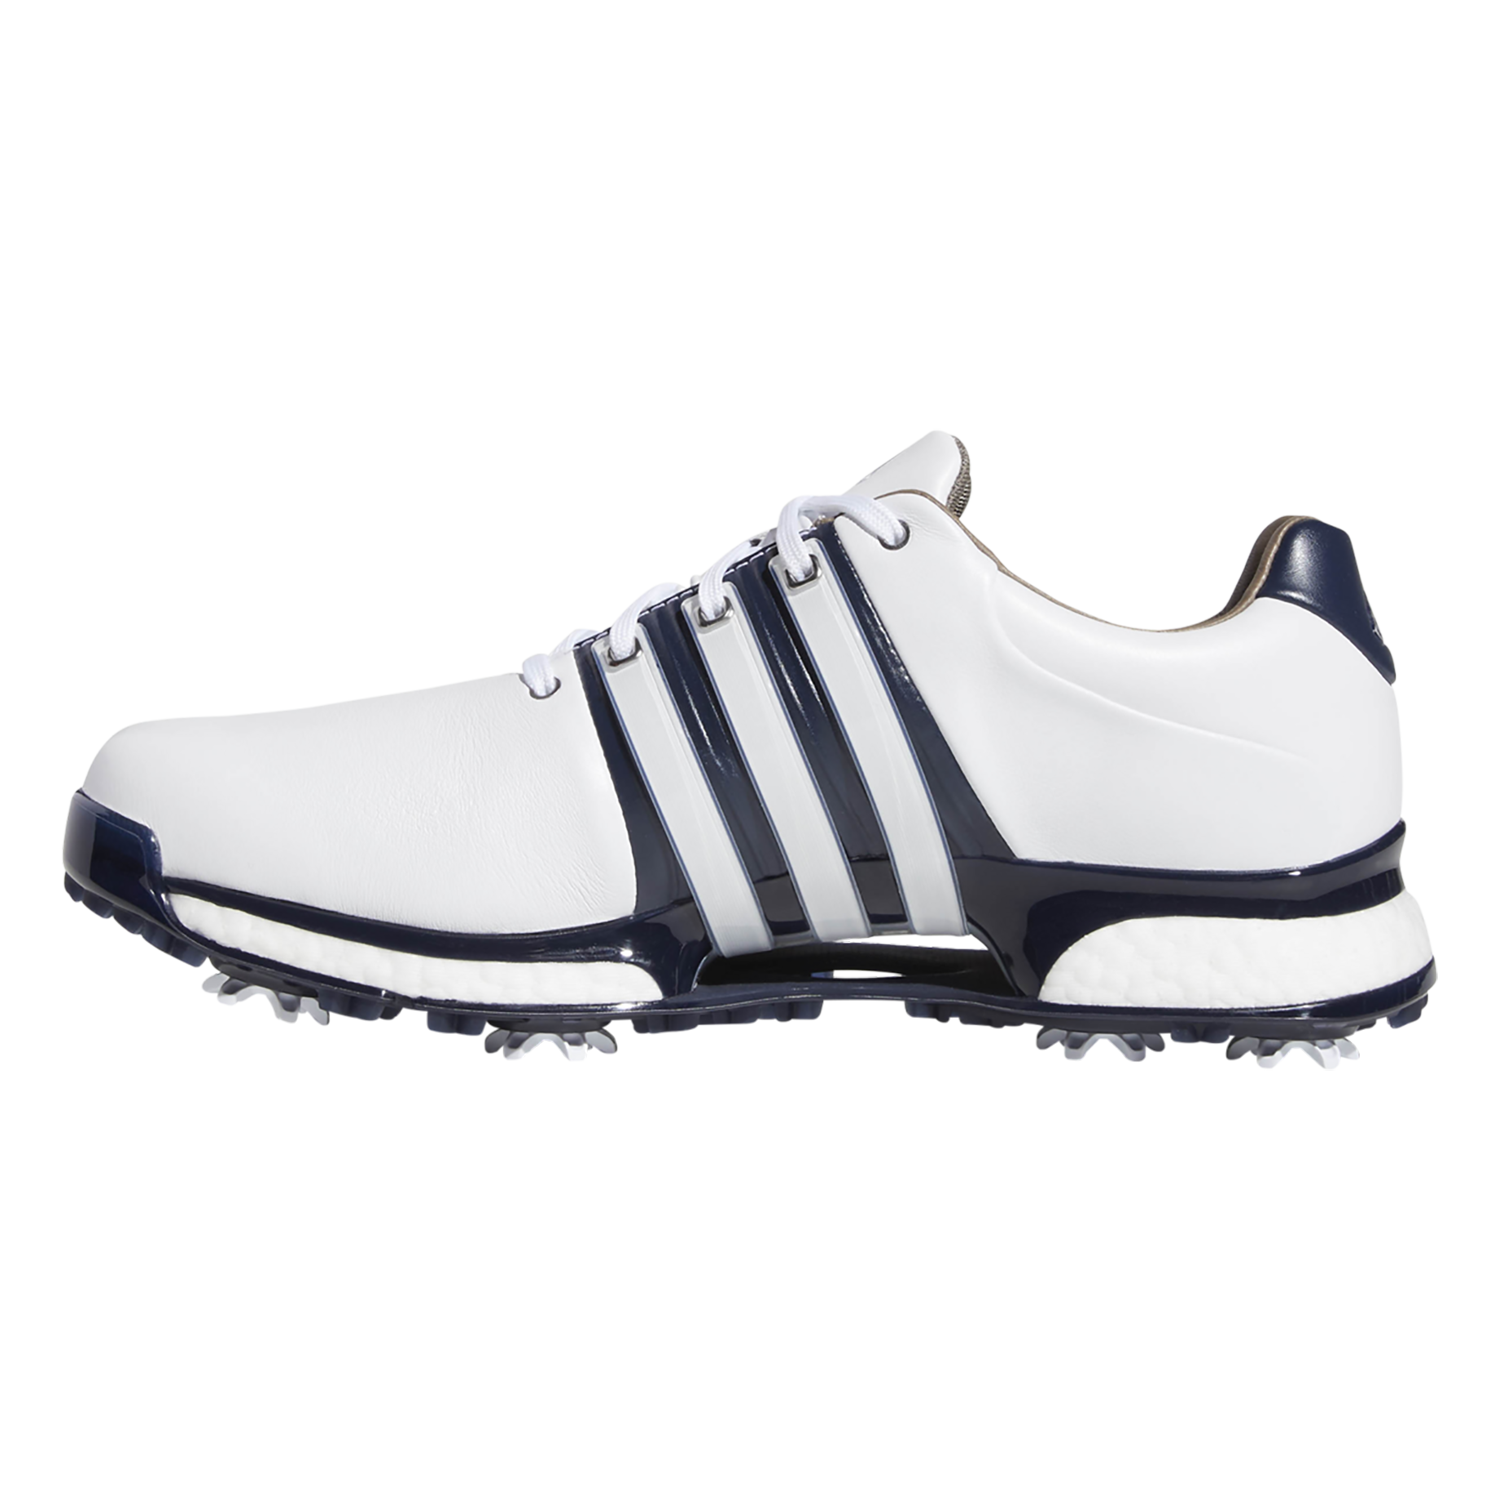 adidas clearance golf shoes